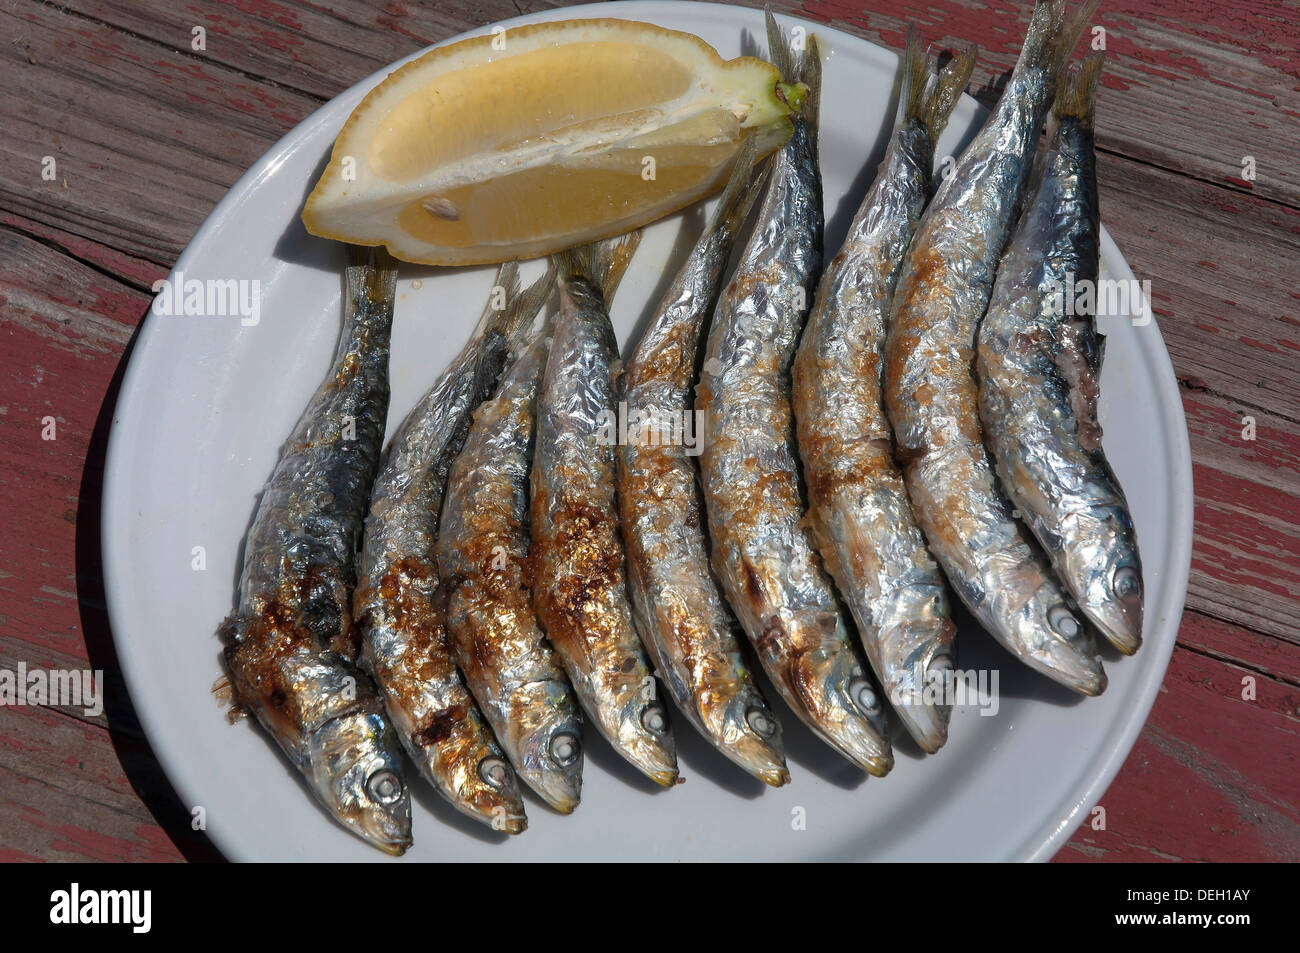 Sardines grillées, Torre del Mar, Malaga-province, Andalusia, Spain, Europe Banque D'Images